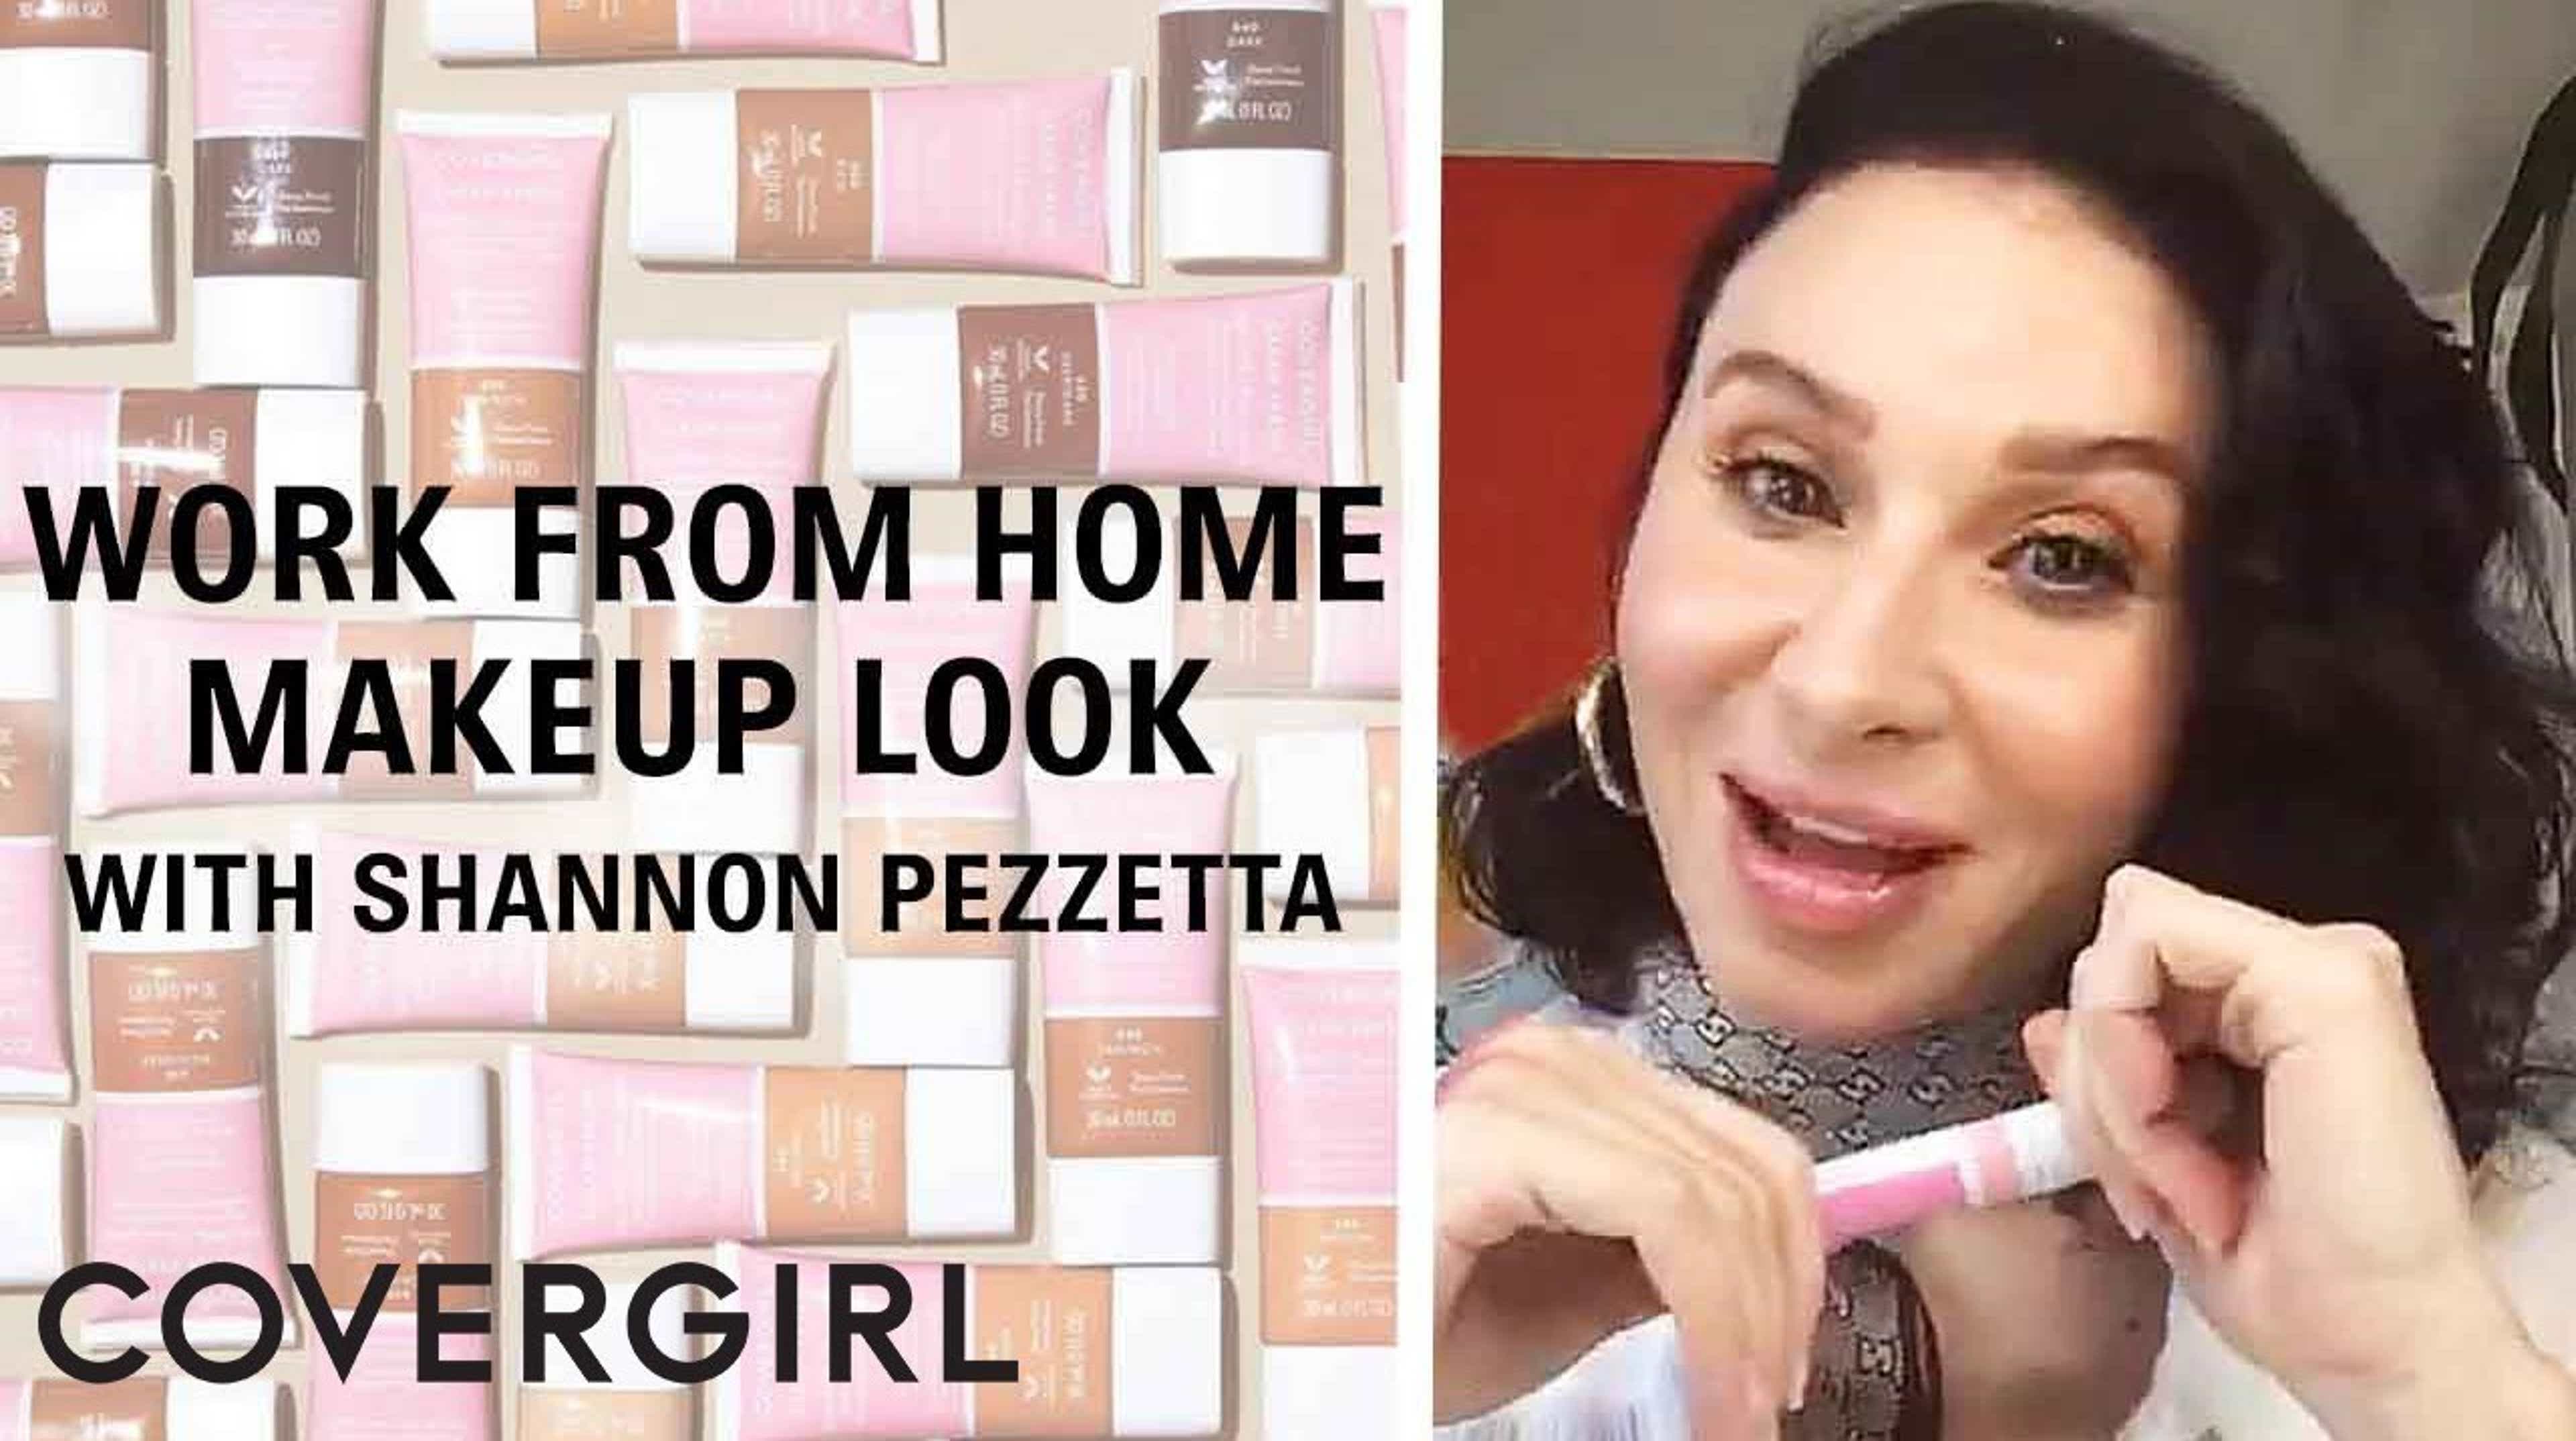 Work From Home Makeup Tutorial with Shannon Pezzetta